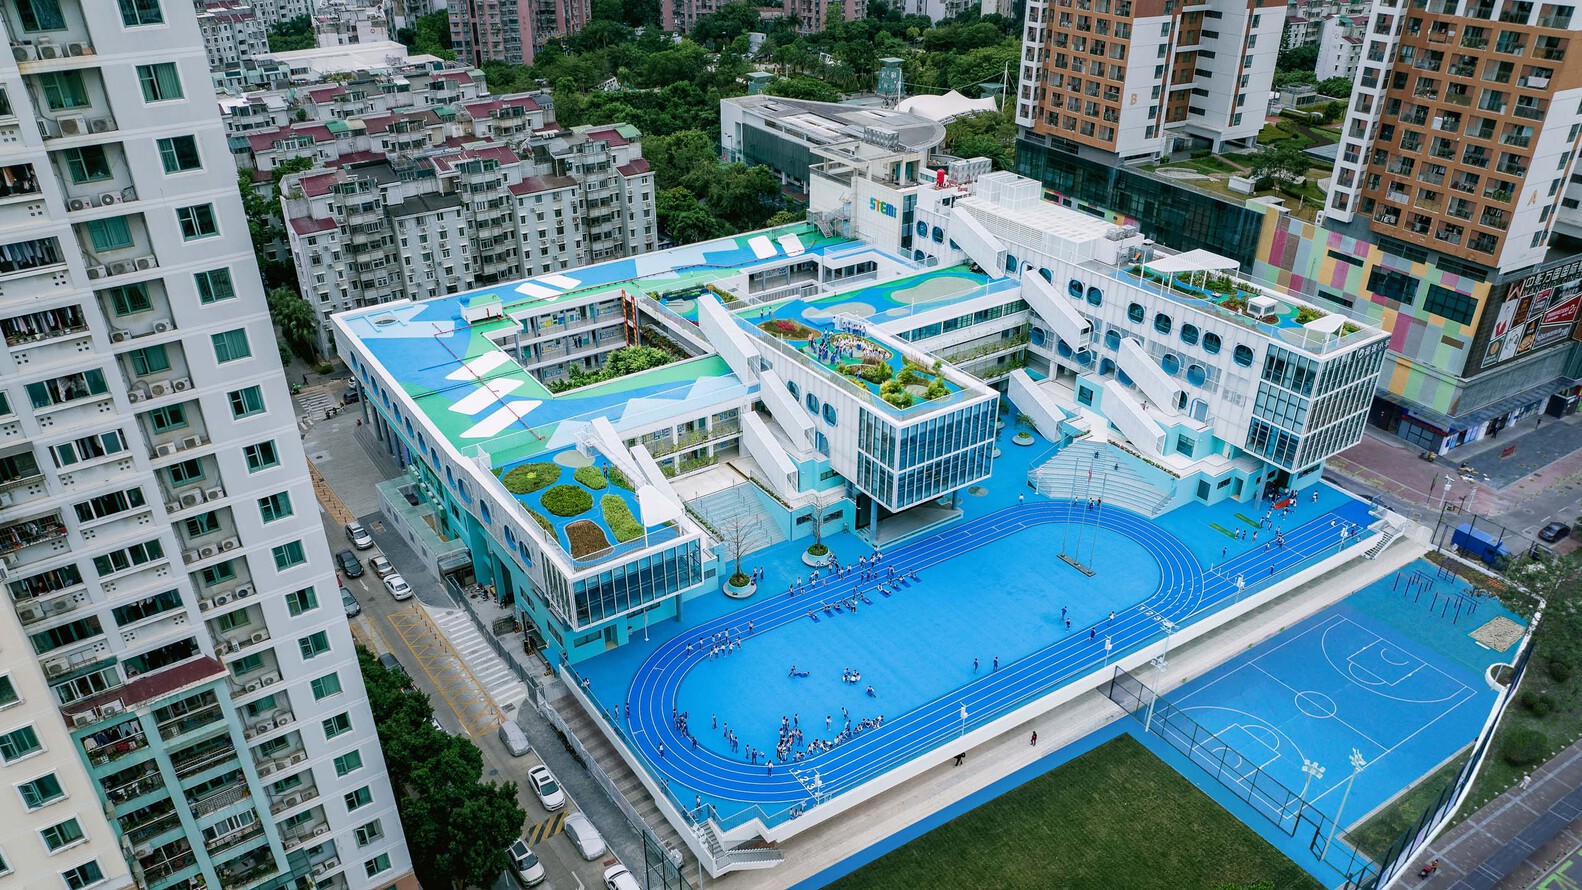 Fuqiang Elementary School by People's Architecture